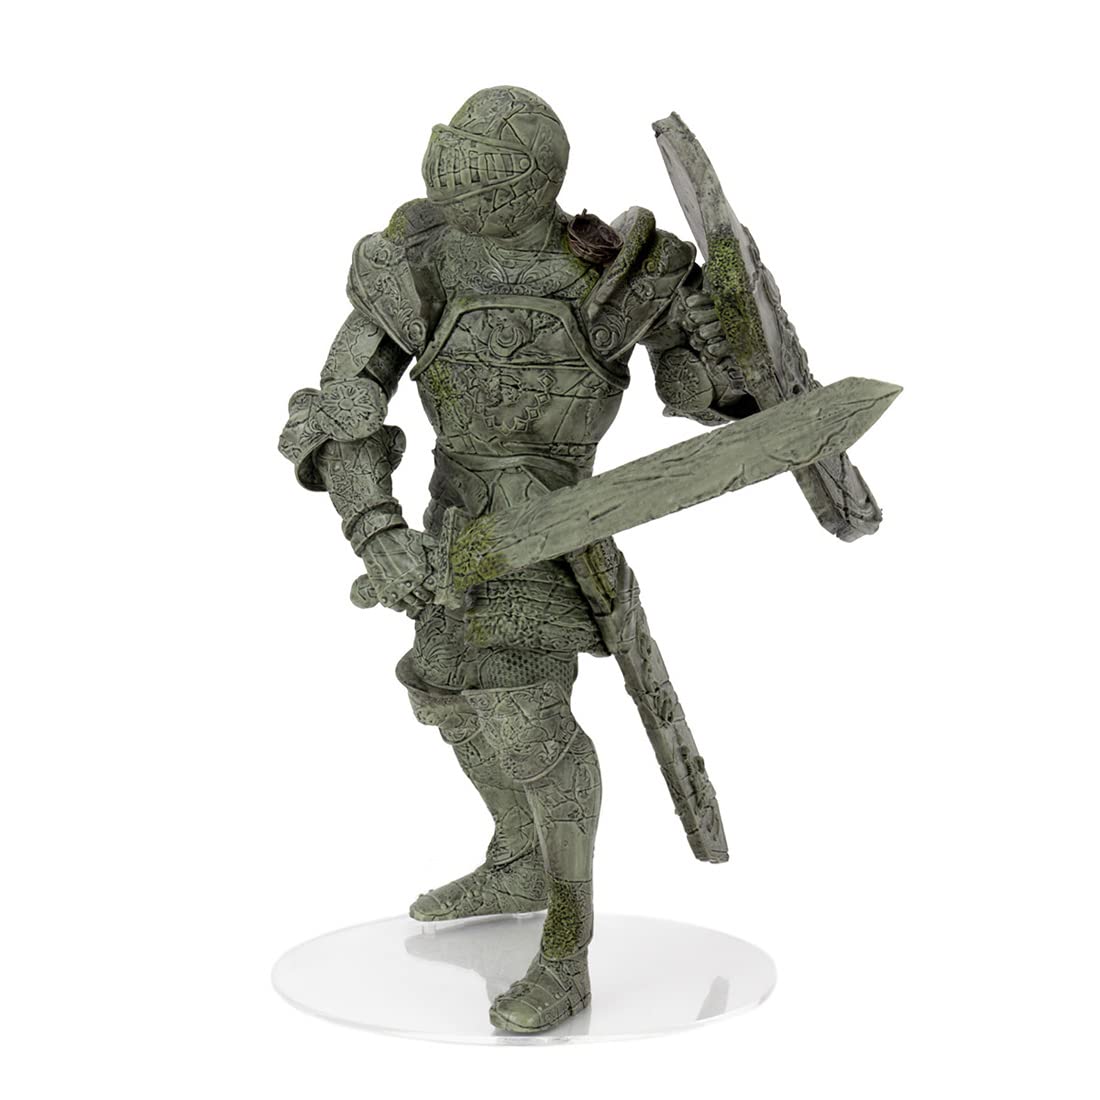 WizKids Dungeons & Dragons - Walking Statue Of Waterdeep - The Honorable Knight